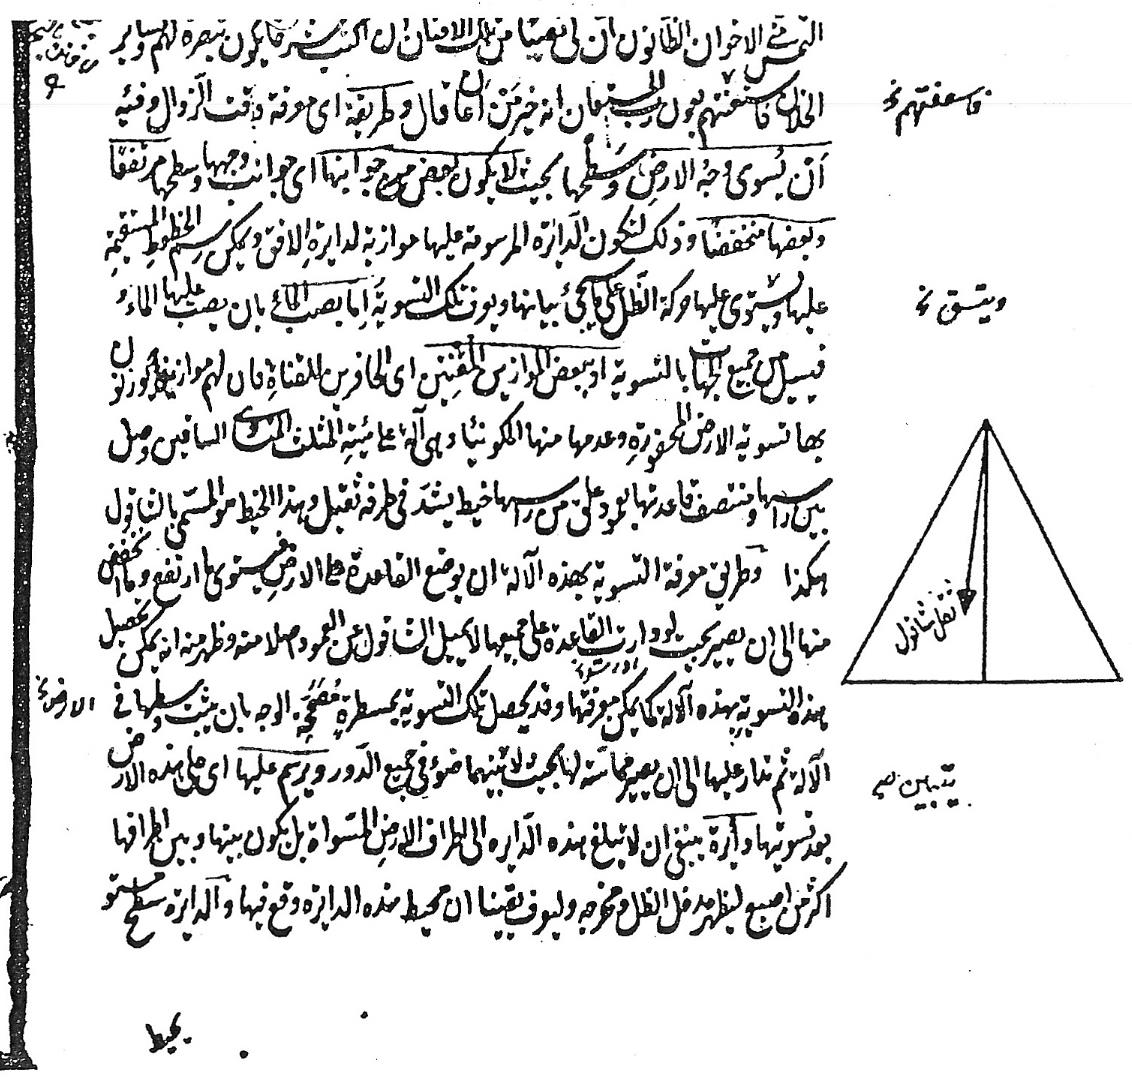 Ibn-e-Yunus was the first to invent pendulum and describe oscillatory motion in 10th century. Note that Galileo was born in 17th century.The proper explanation of rainbow and the prism phenomena was given by Kamal ud Din Farisi and al-Shirazi, which later influenced Newton